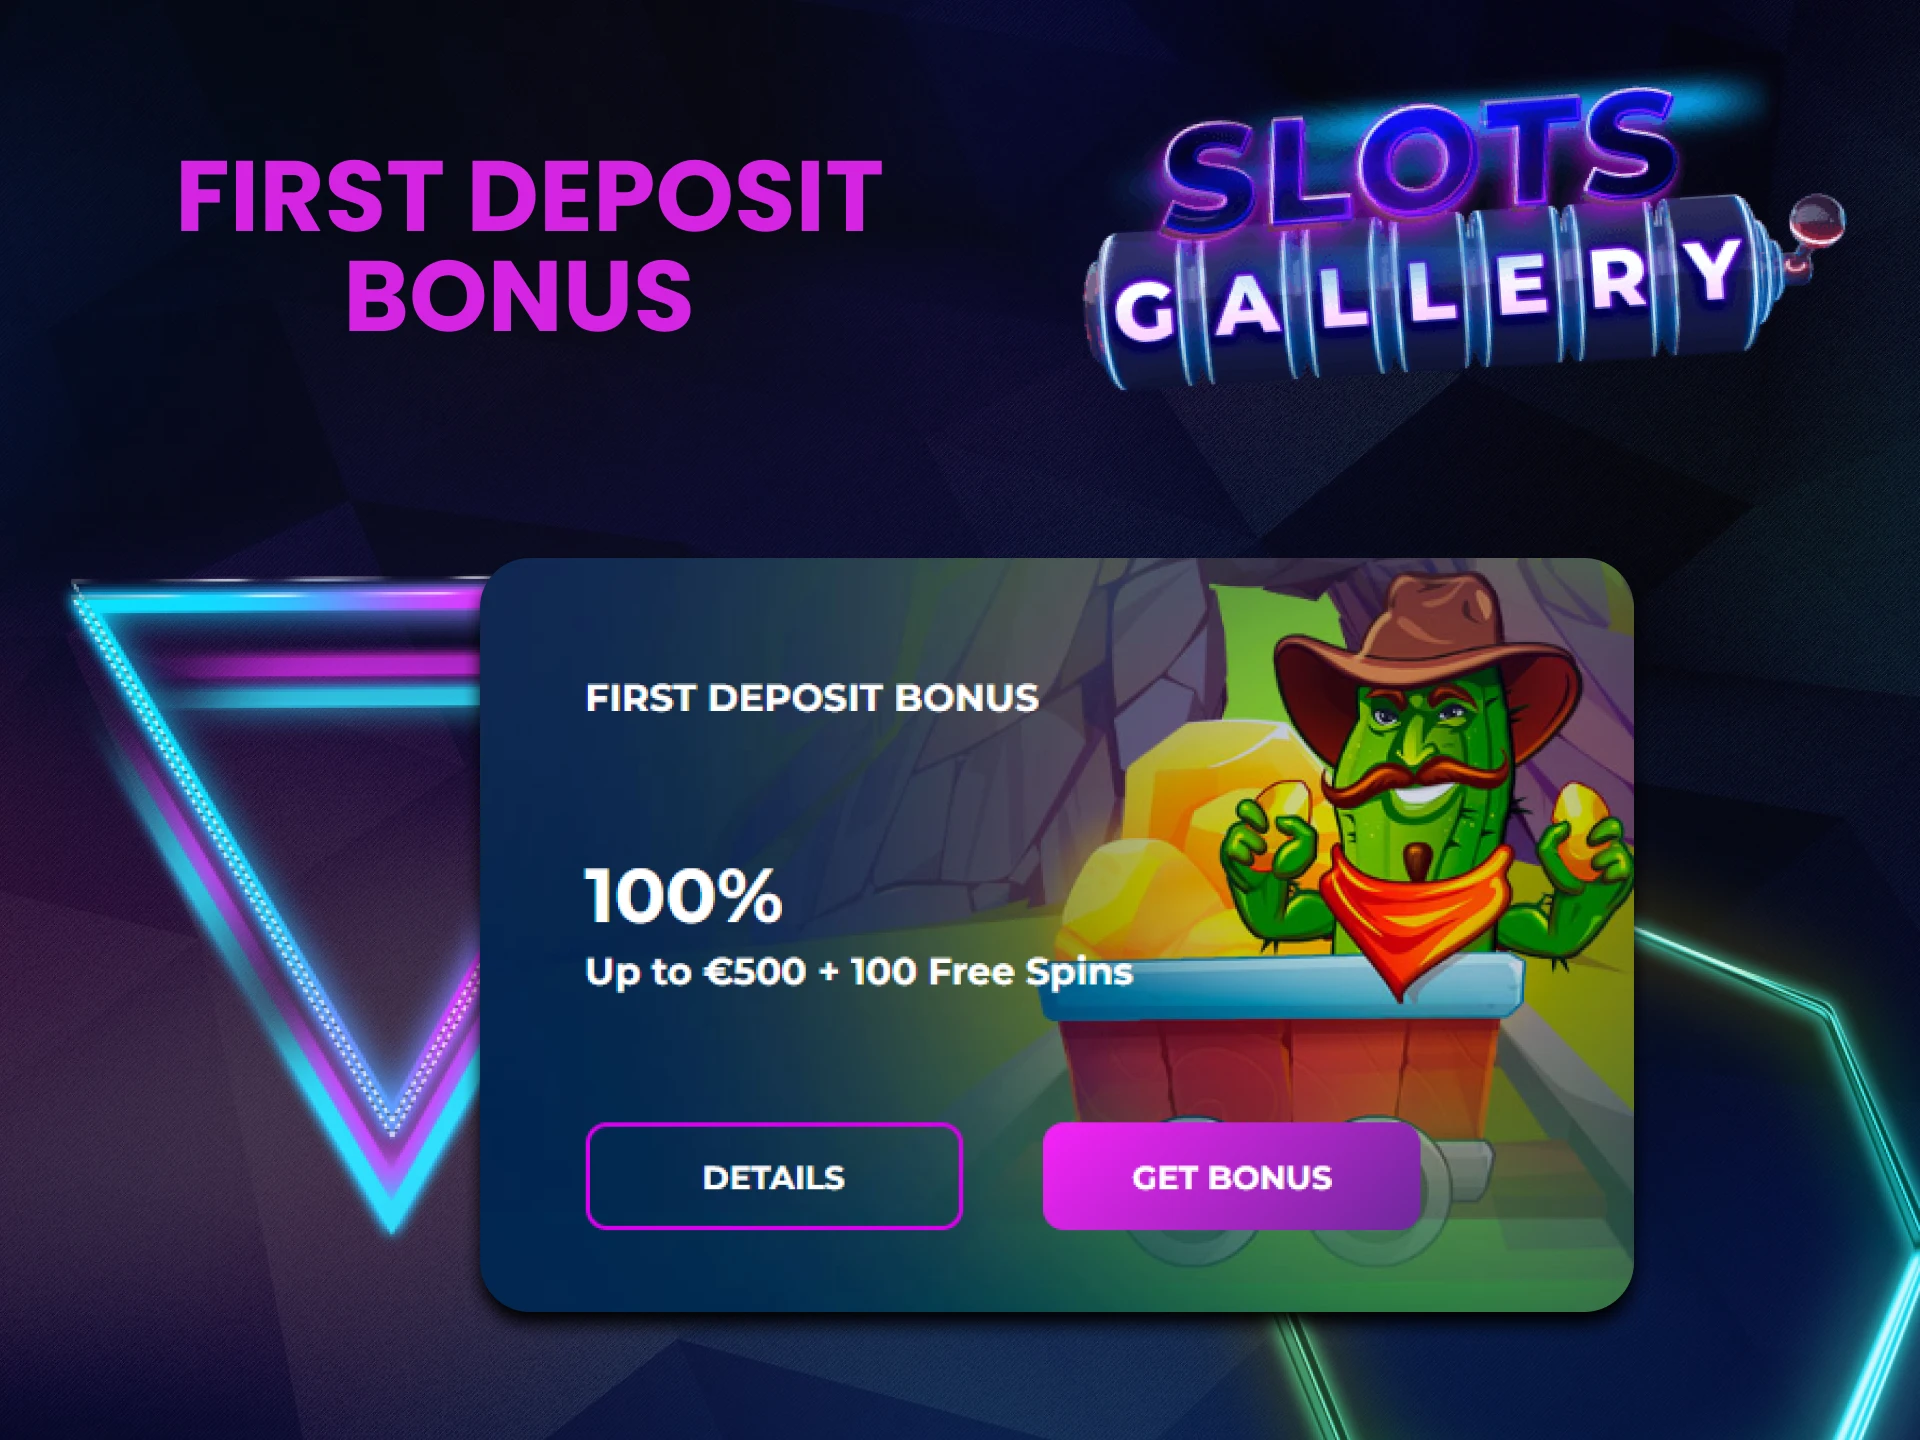 Slots Gallery gives a bonus for your first deposit.